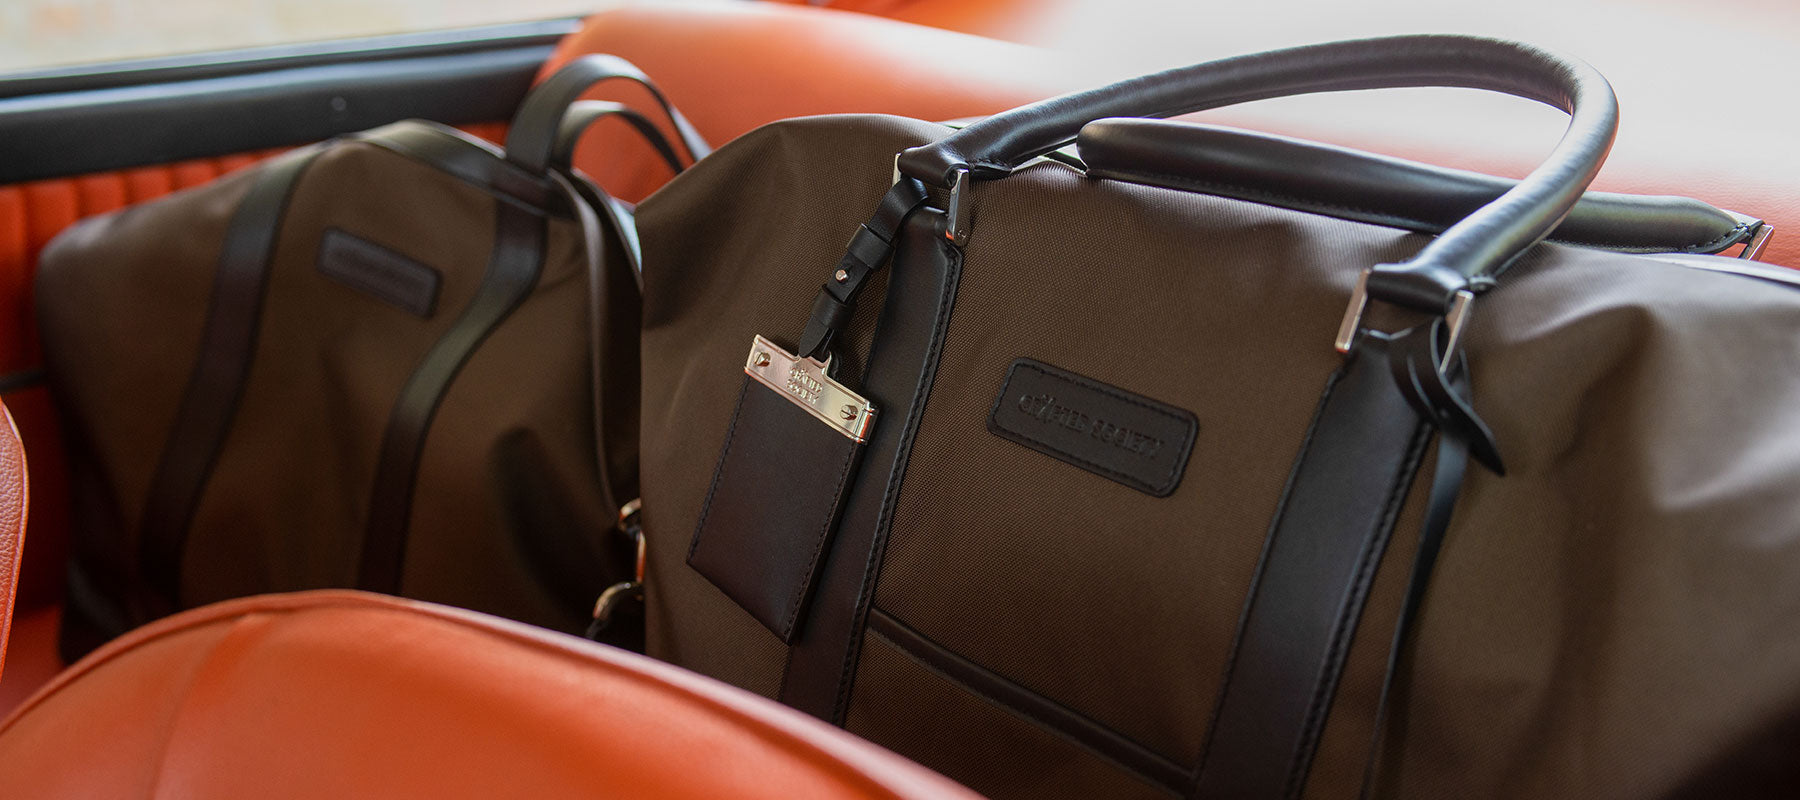 weekender bags in chocolate econyl and black nappa leather on backseat of a vintage car